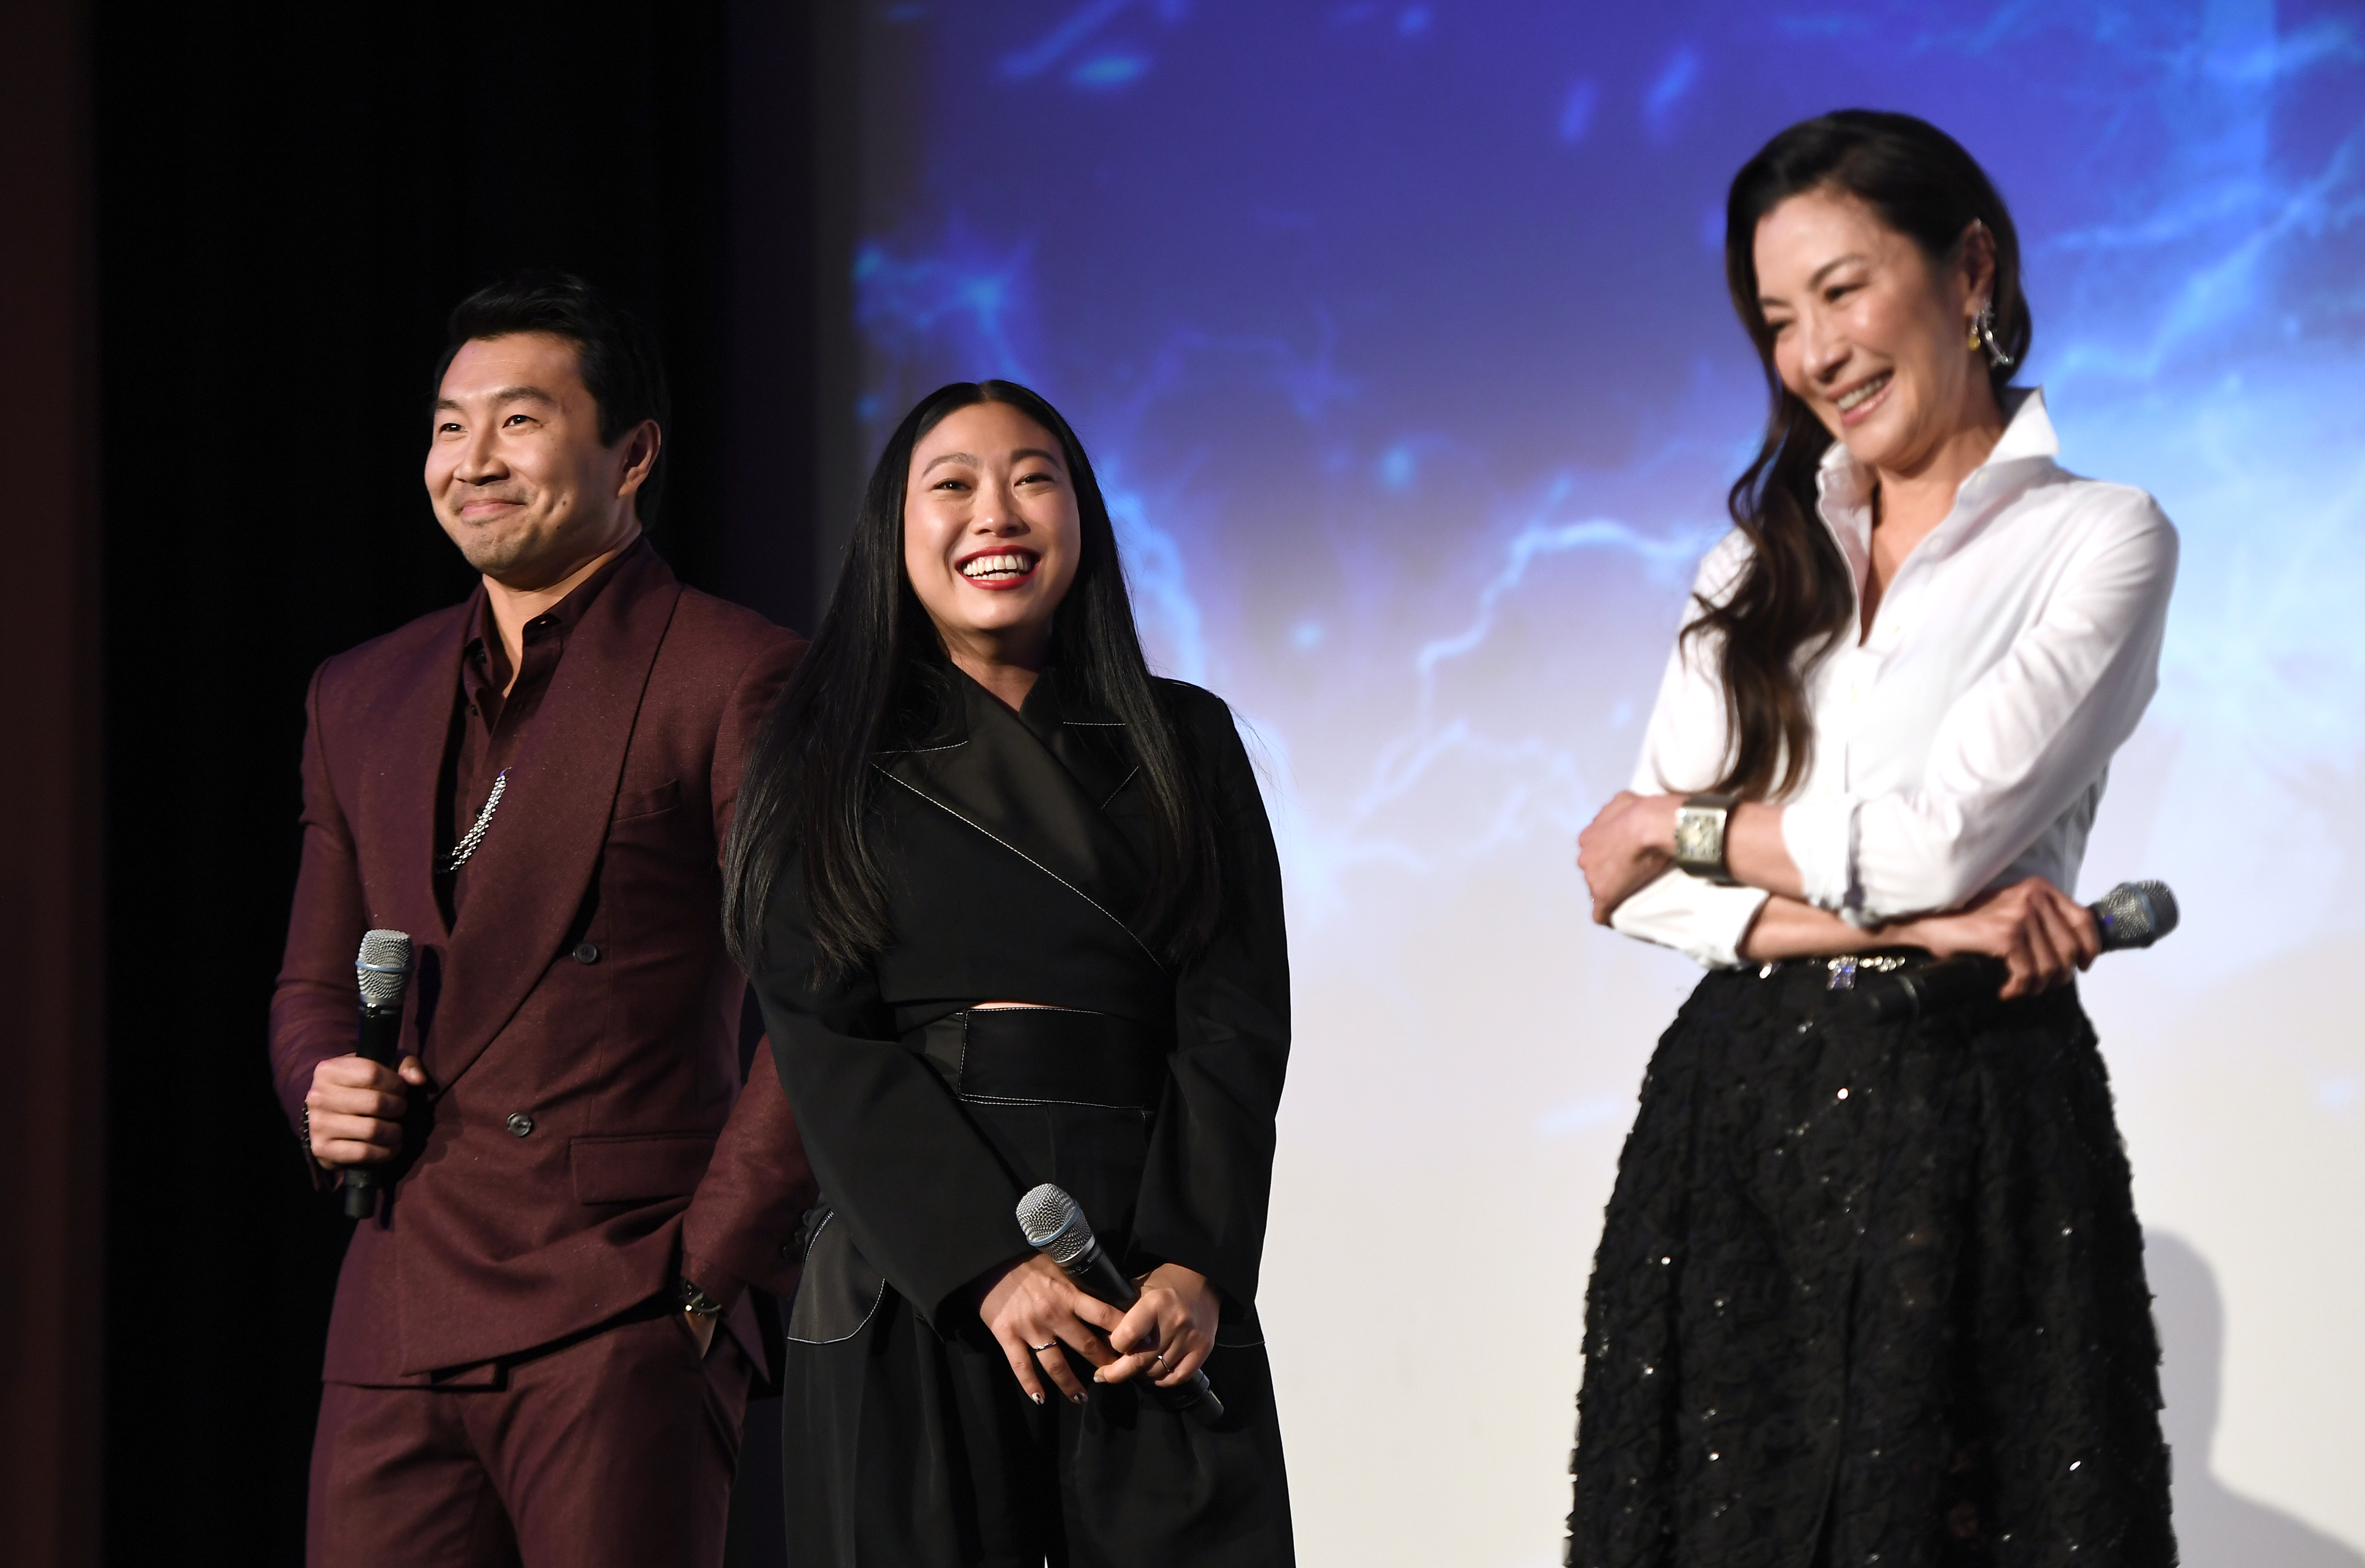 'Shang-Chi' stars Simu Liu, Awkwafina, and Michelle Yeoh hold microphones and speak onstage before the movie hits the box office. Liu wears a maroon suit, Awkwafina wears a black jacket with a black belt, and Yeoh wears a black sparkly skirt and a white button down shirt.